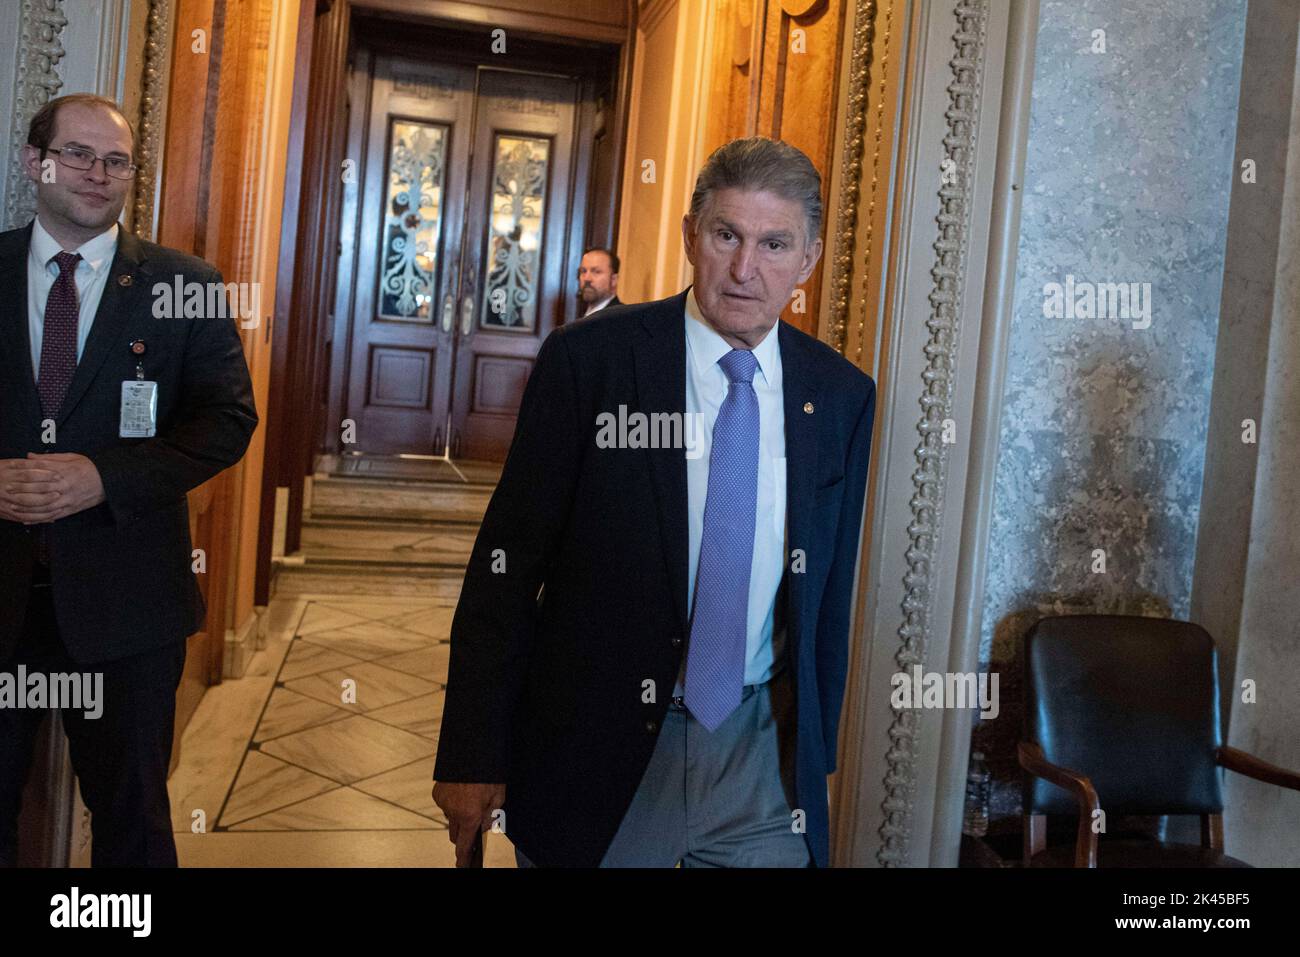 Washington, DC, Sept. 29, 2022. United States Senator Joe Manchin III (Democrat of West Virginia), exits the US Senate Chamber after voting on the a Continuing Resolution which, if passed, will fund the US government from October 1 through December 16, in the US Capitol in Washington, DC, Thursday, September 29, 2022. Photo by Cliff Owen/CNP/ABACAPRESS.COM Stock Photo